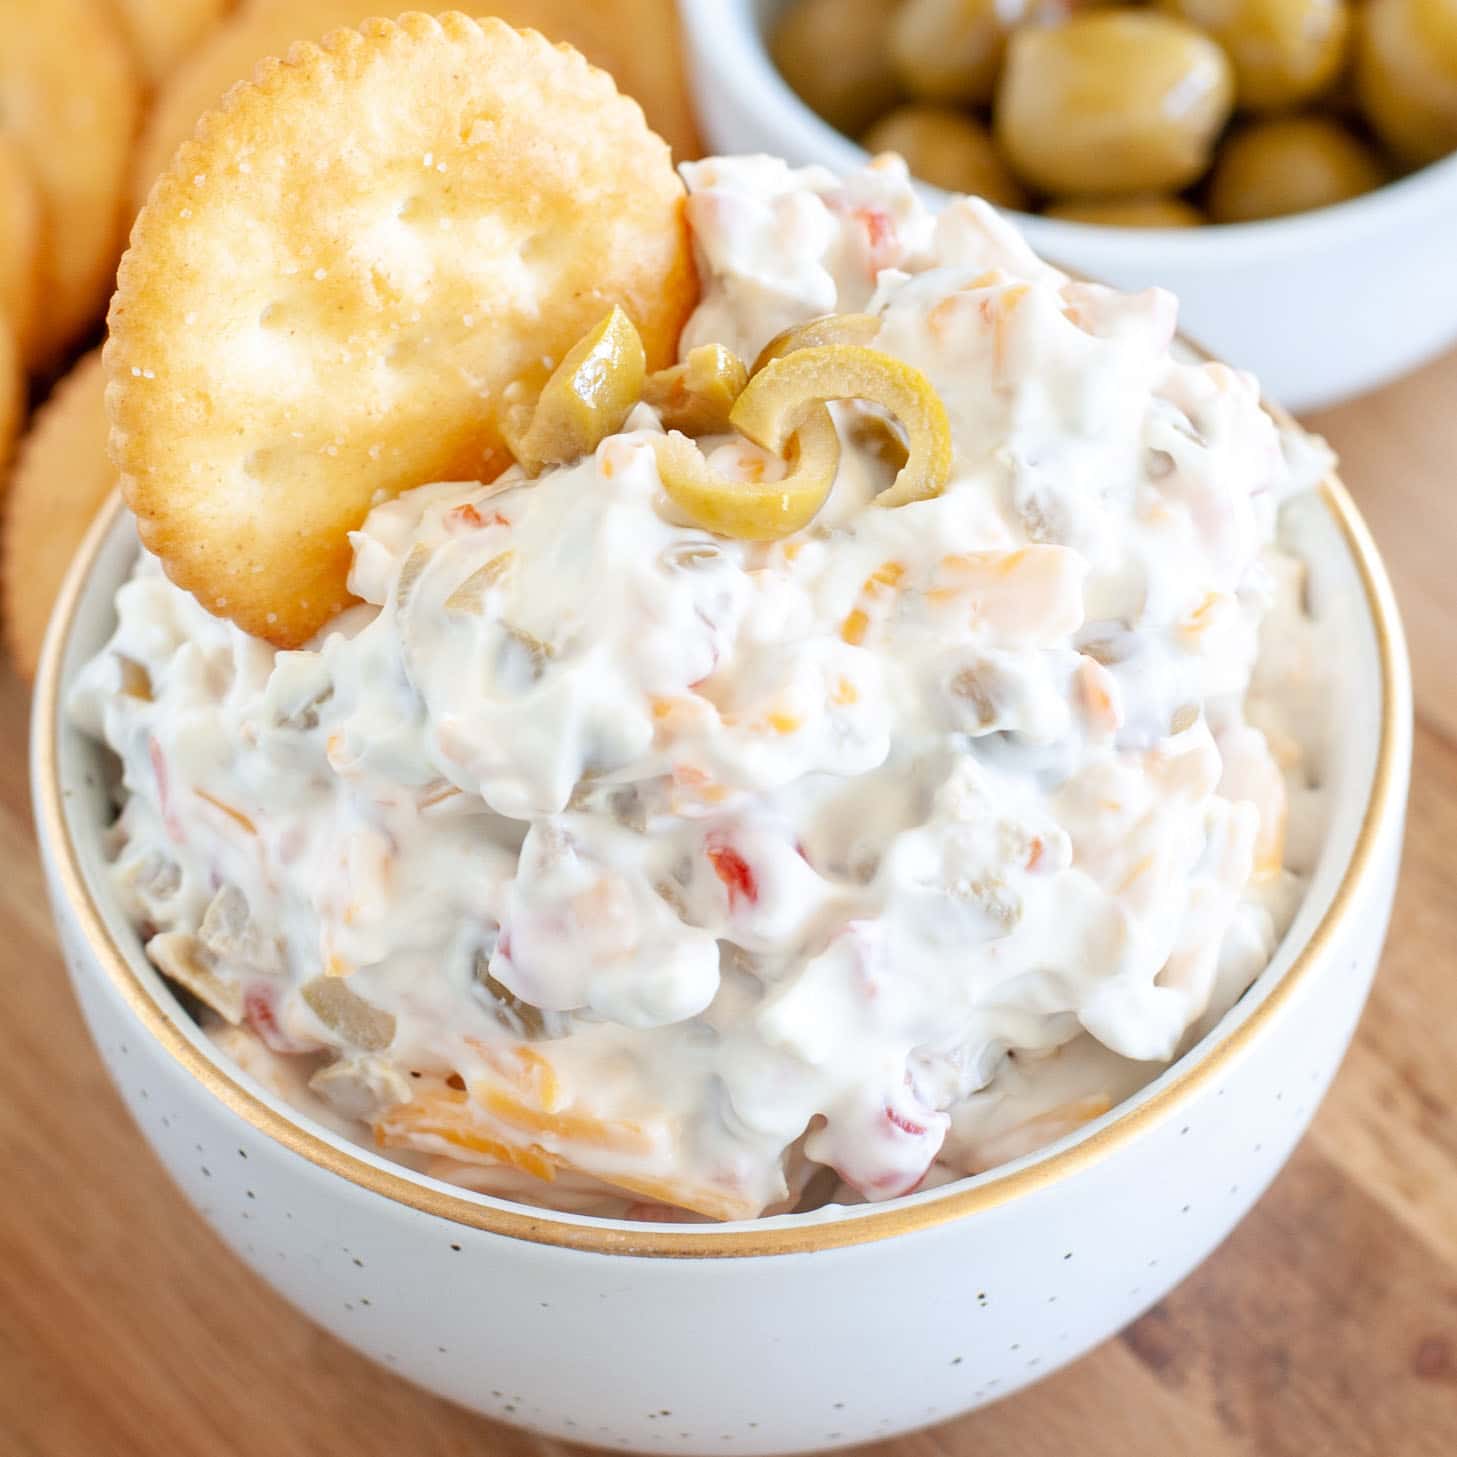 Bowl with dip made of cream cheese and olives. Bowl of olives and crackers.